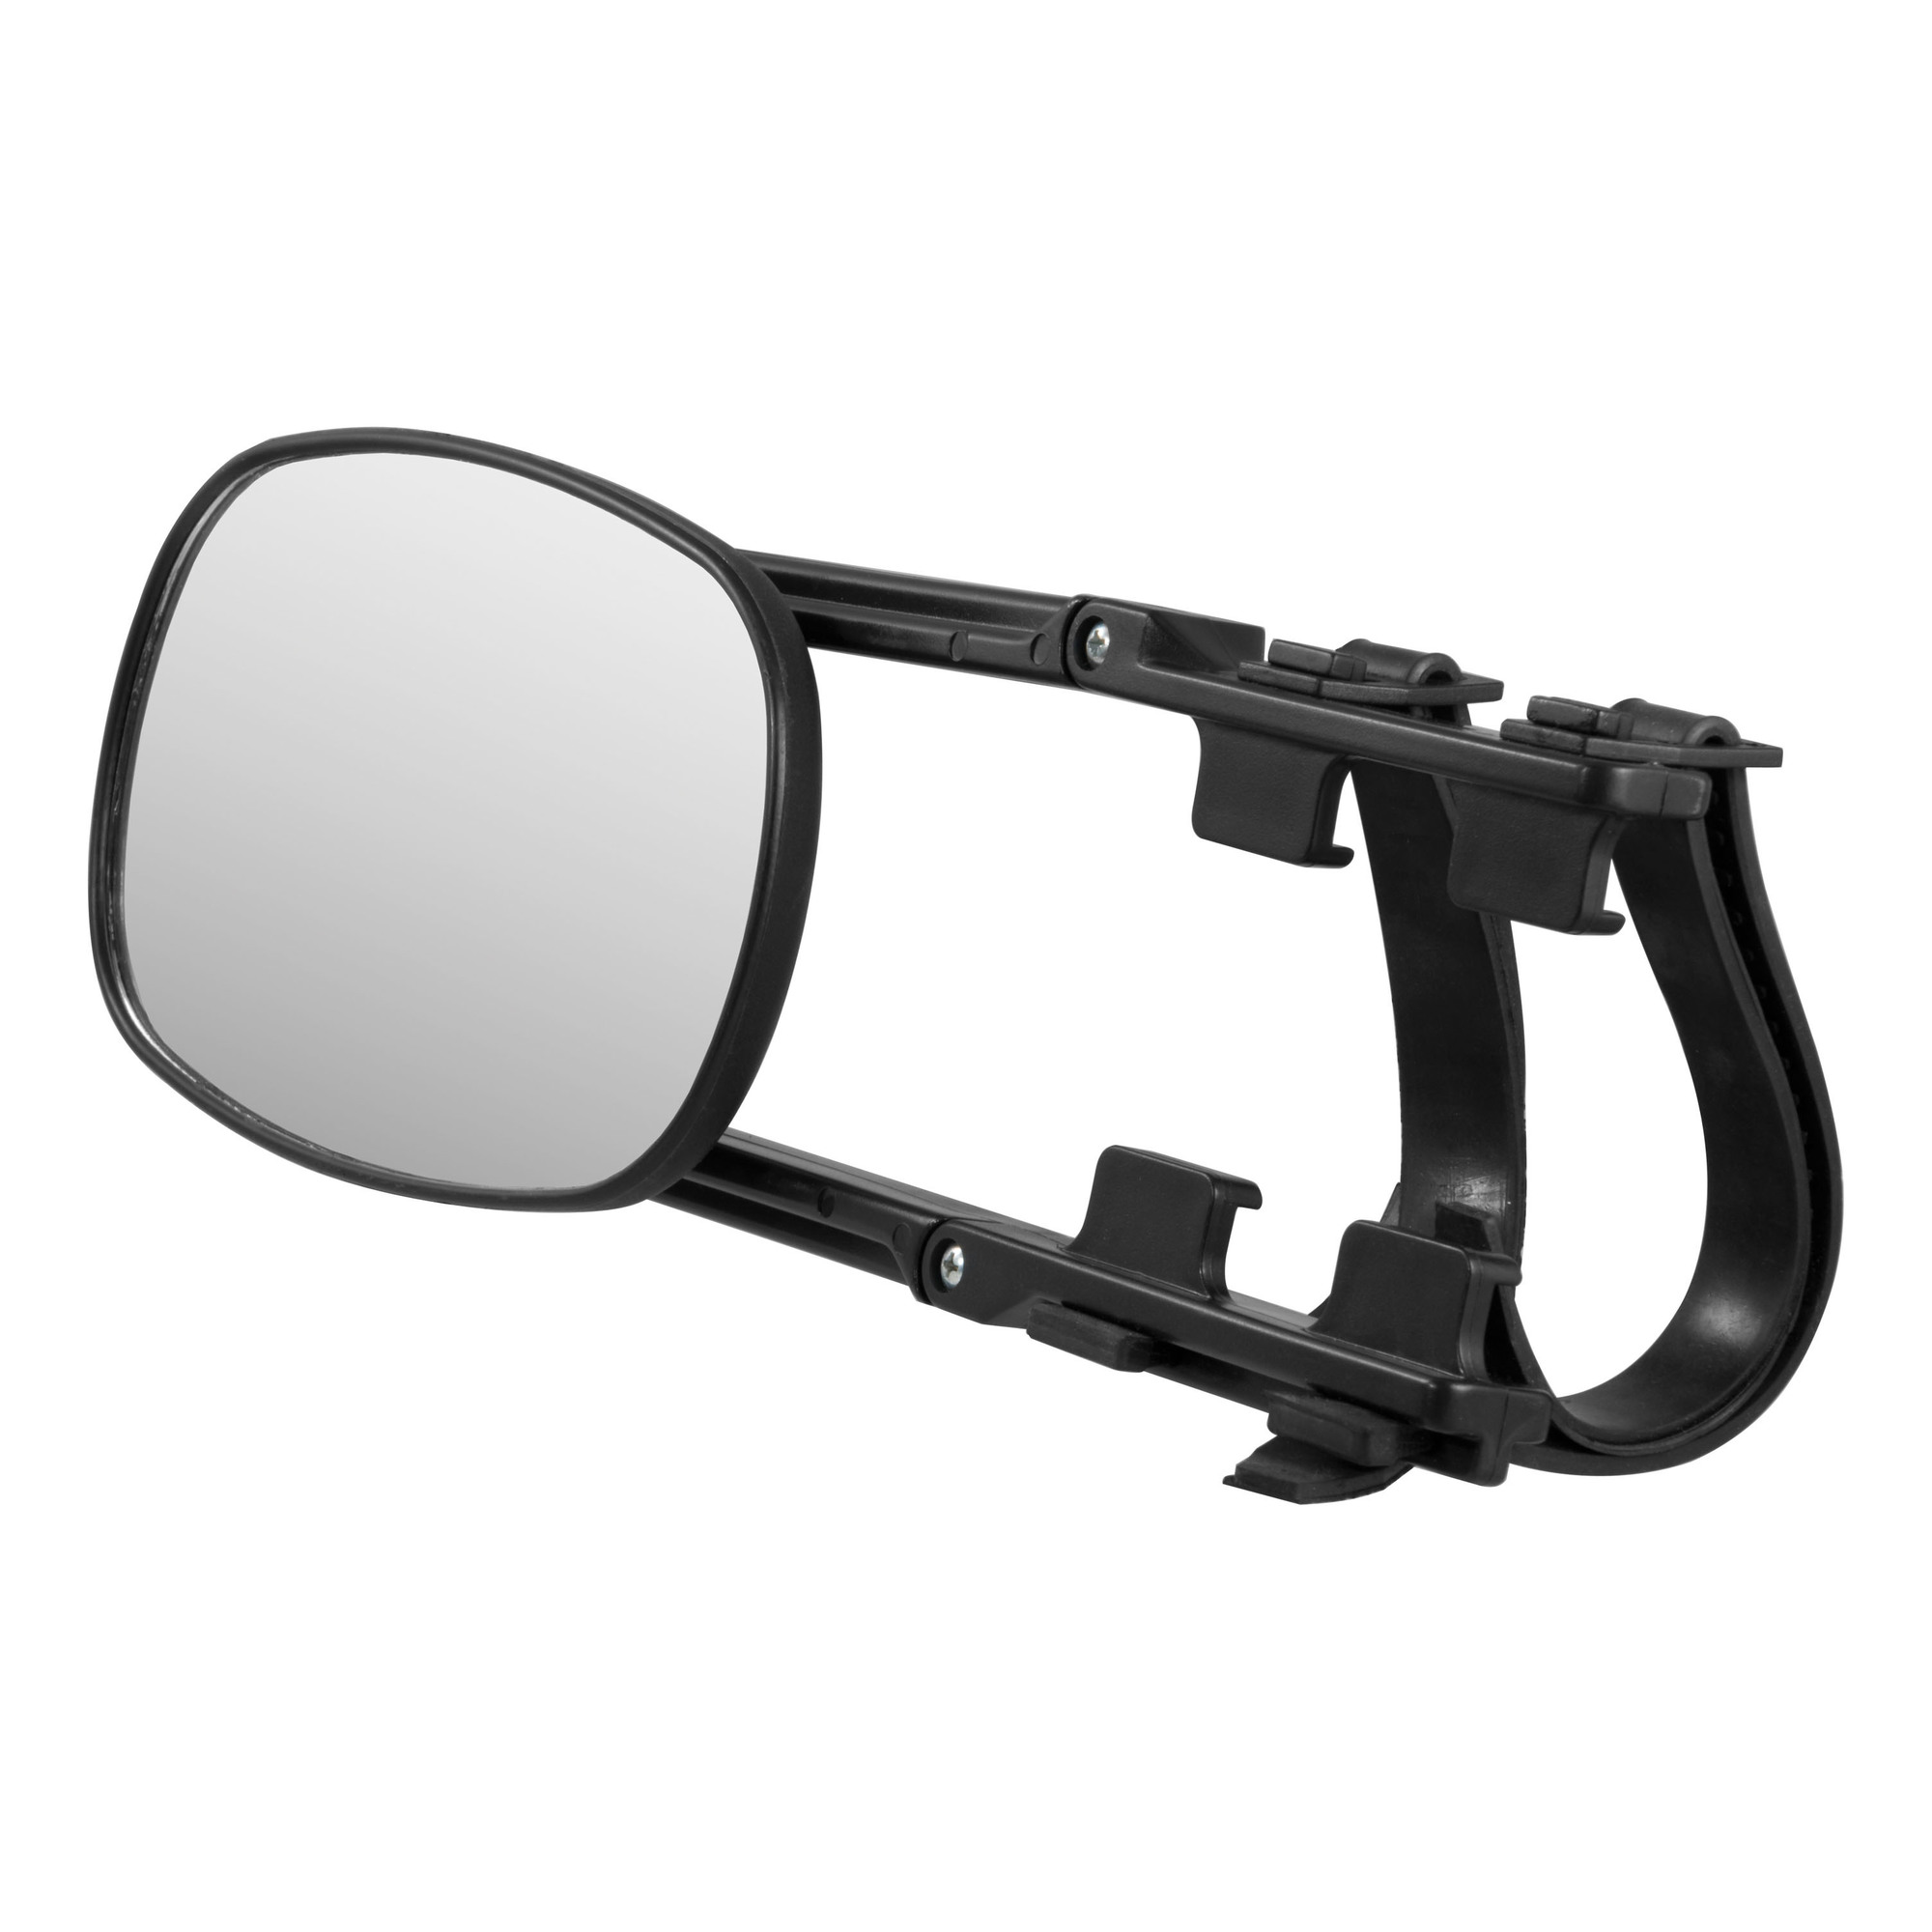 Curt Manufacturing, Extended View Tow Mirror, Material Multiple, Model 20002